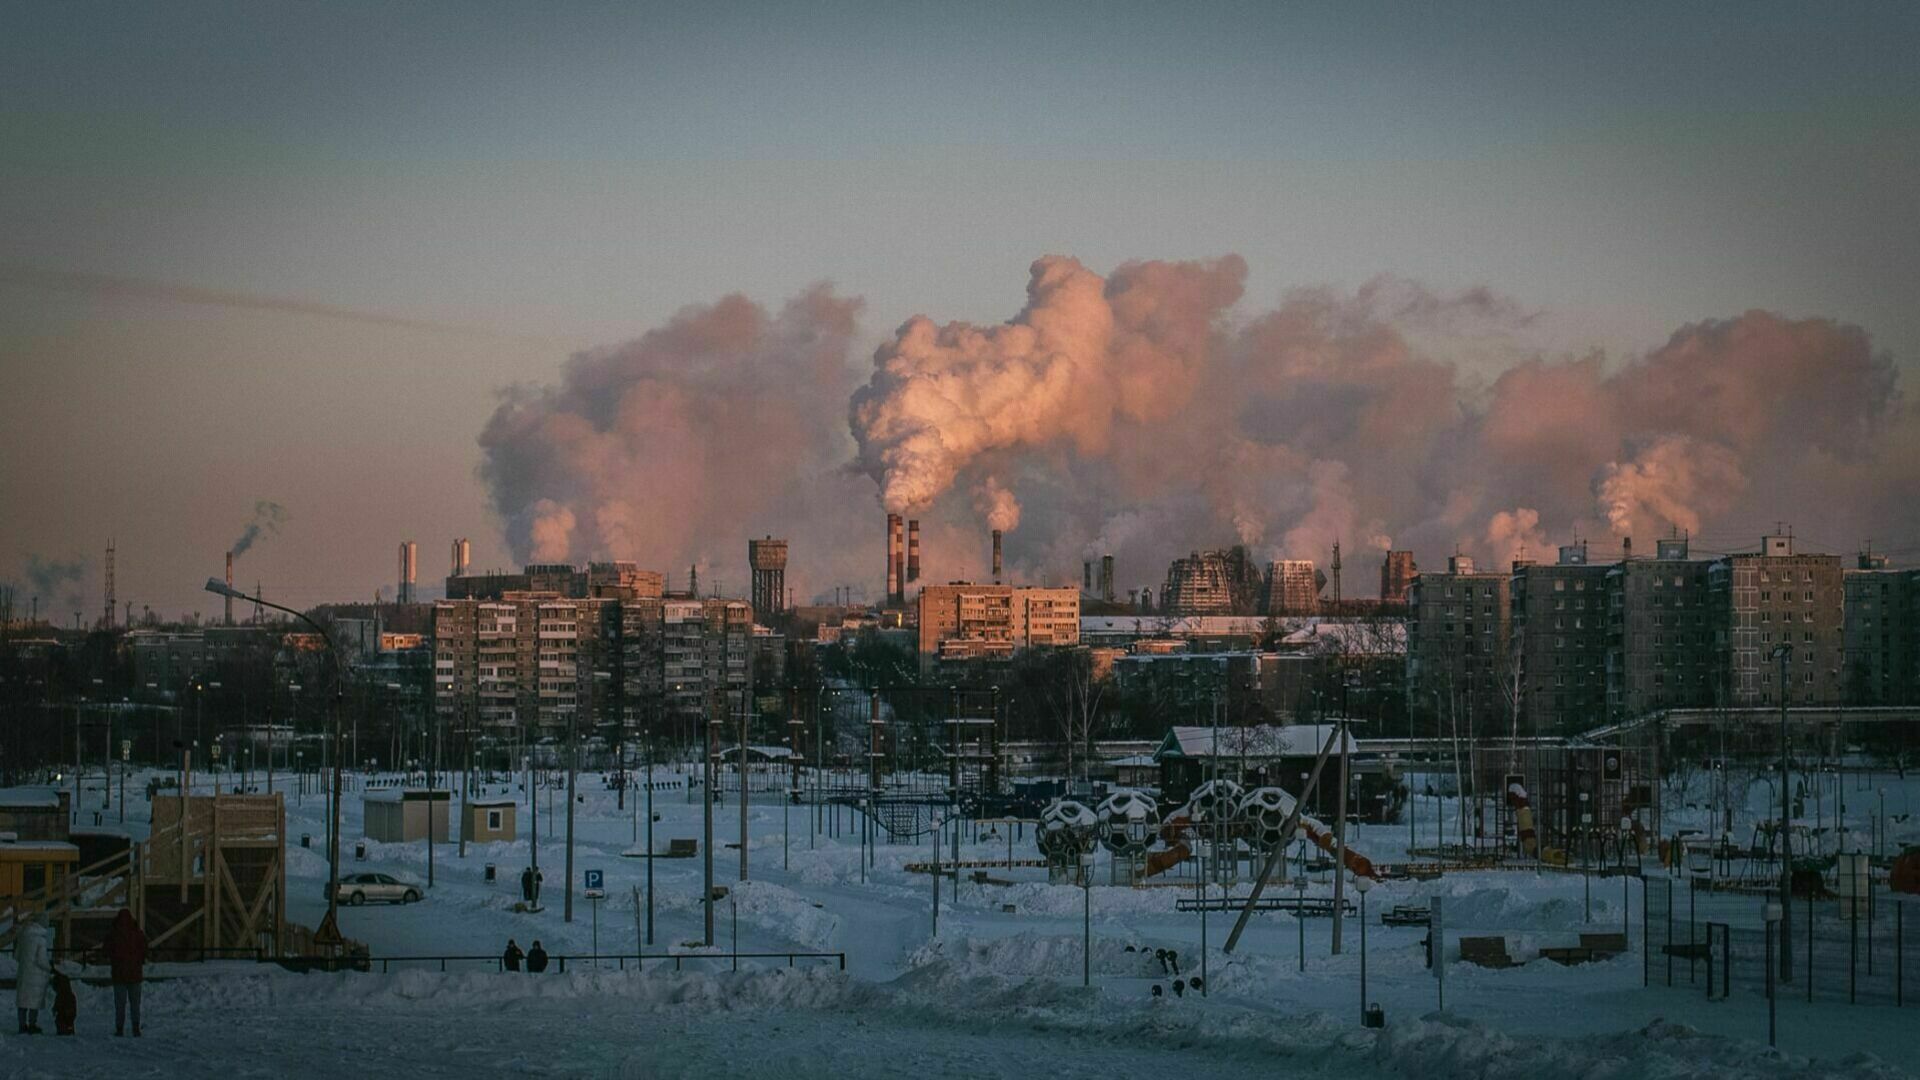 A resident of Ryazan sued Rosprirodnadzor for 20 thousand rubles for dirty air in the city